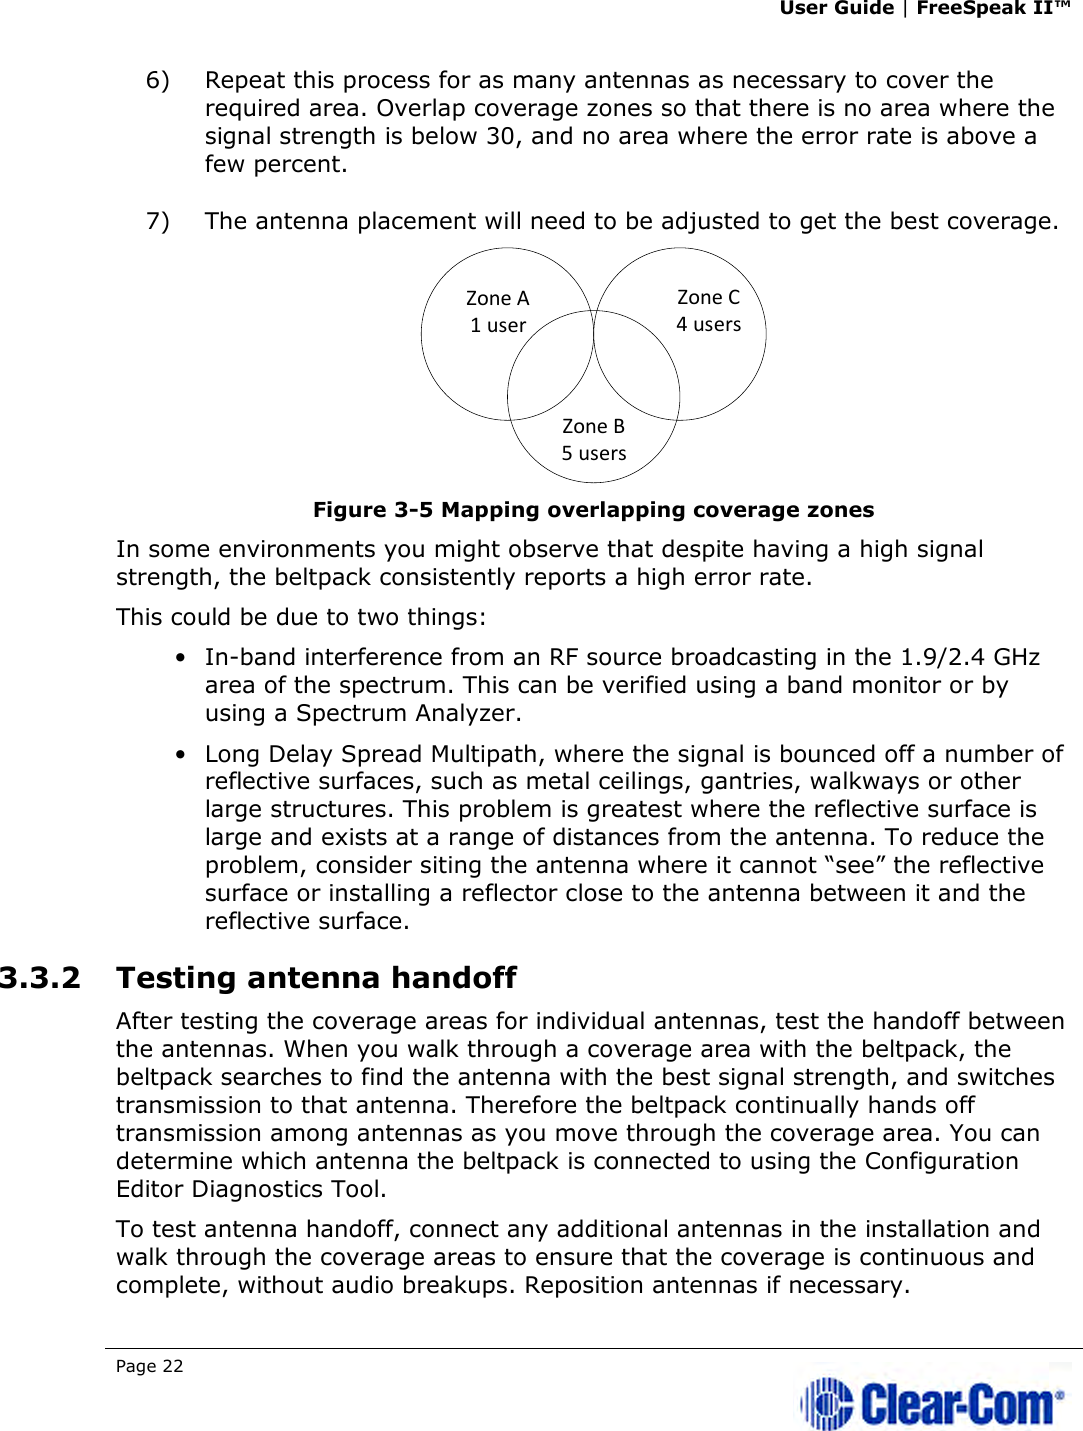 User Guide | FreeSpeak II™  Page 22   6) Repeat this process for as many antennas as necessary to cover the required area. Overlap coverage zones so that there is no area where the signal strength is below 30, and no area where the error rate is above a few percent.  7) The antenna placement will need to be adjusted to get the best coverage.  Figure 3-5 Mapping overlapping coverage zones In some environments you might observe that despite having a high signal strength, the beltpack consistently reports a high error rate. This could be due to two things: • In-band interference from an RF source broadcasting in the 1.9/2.4 GHz area of the spectrum. This can be verified using a band monitor or by using a Spectrum Analyzer. • Long Delay Spread Multipath, where the signal is bounced off a number of reflective surfaces, such as metal ceilings, gantries, walkways or other large structures. This problem is greatest where the reflective surface is large and exists at a range of distances from the antenna. To reduce the problem, consider siting the antenna where it cannot “see” the reflective surface or installing a reflector close to the antenna between it and the reflective surface. 3.3.2 Testing antenna handoff  After testing the coverage areas for individual antennas, test the handoff between the antennas. When you walk through a coverage area with the beltpack, the beltpack searches to find the antenna with the best signal strength, and switches transmission to that antenna. Therefore the beltpack continually hands off transmission among antennas as you move through the coverage area. You can determine which antenna the beltpack is connected to using the Configuration Editor Diagnostics Tool. To test antenna handoff, connect any additional antennas in the installation and walk through the coverage areas to ensure that the coverage is continuous and complete, without audio breakups. Reposition antennas if necessary.  Zone A1 userZone C4 usersZone B5 users